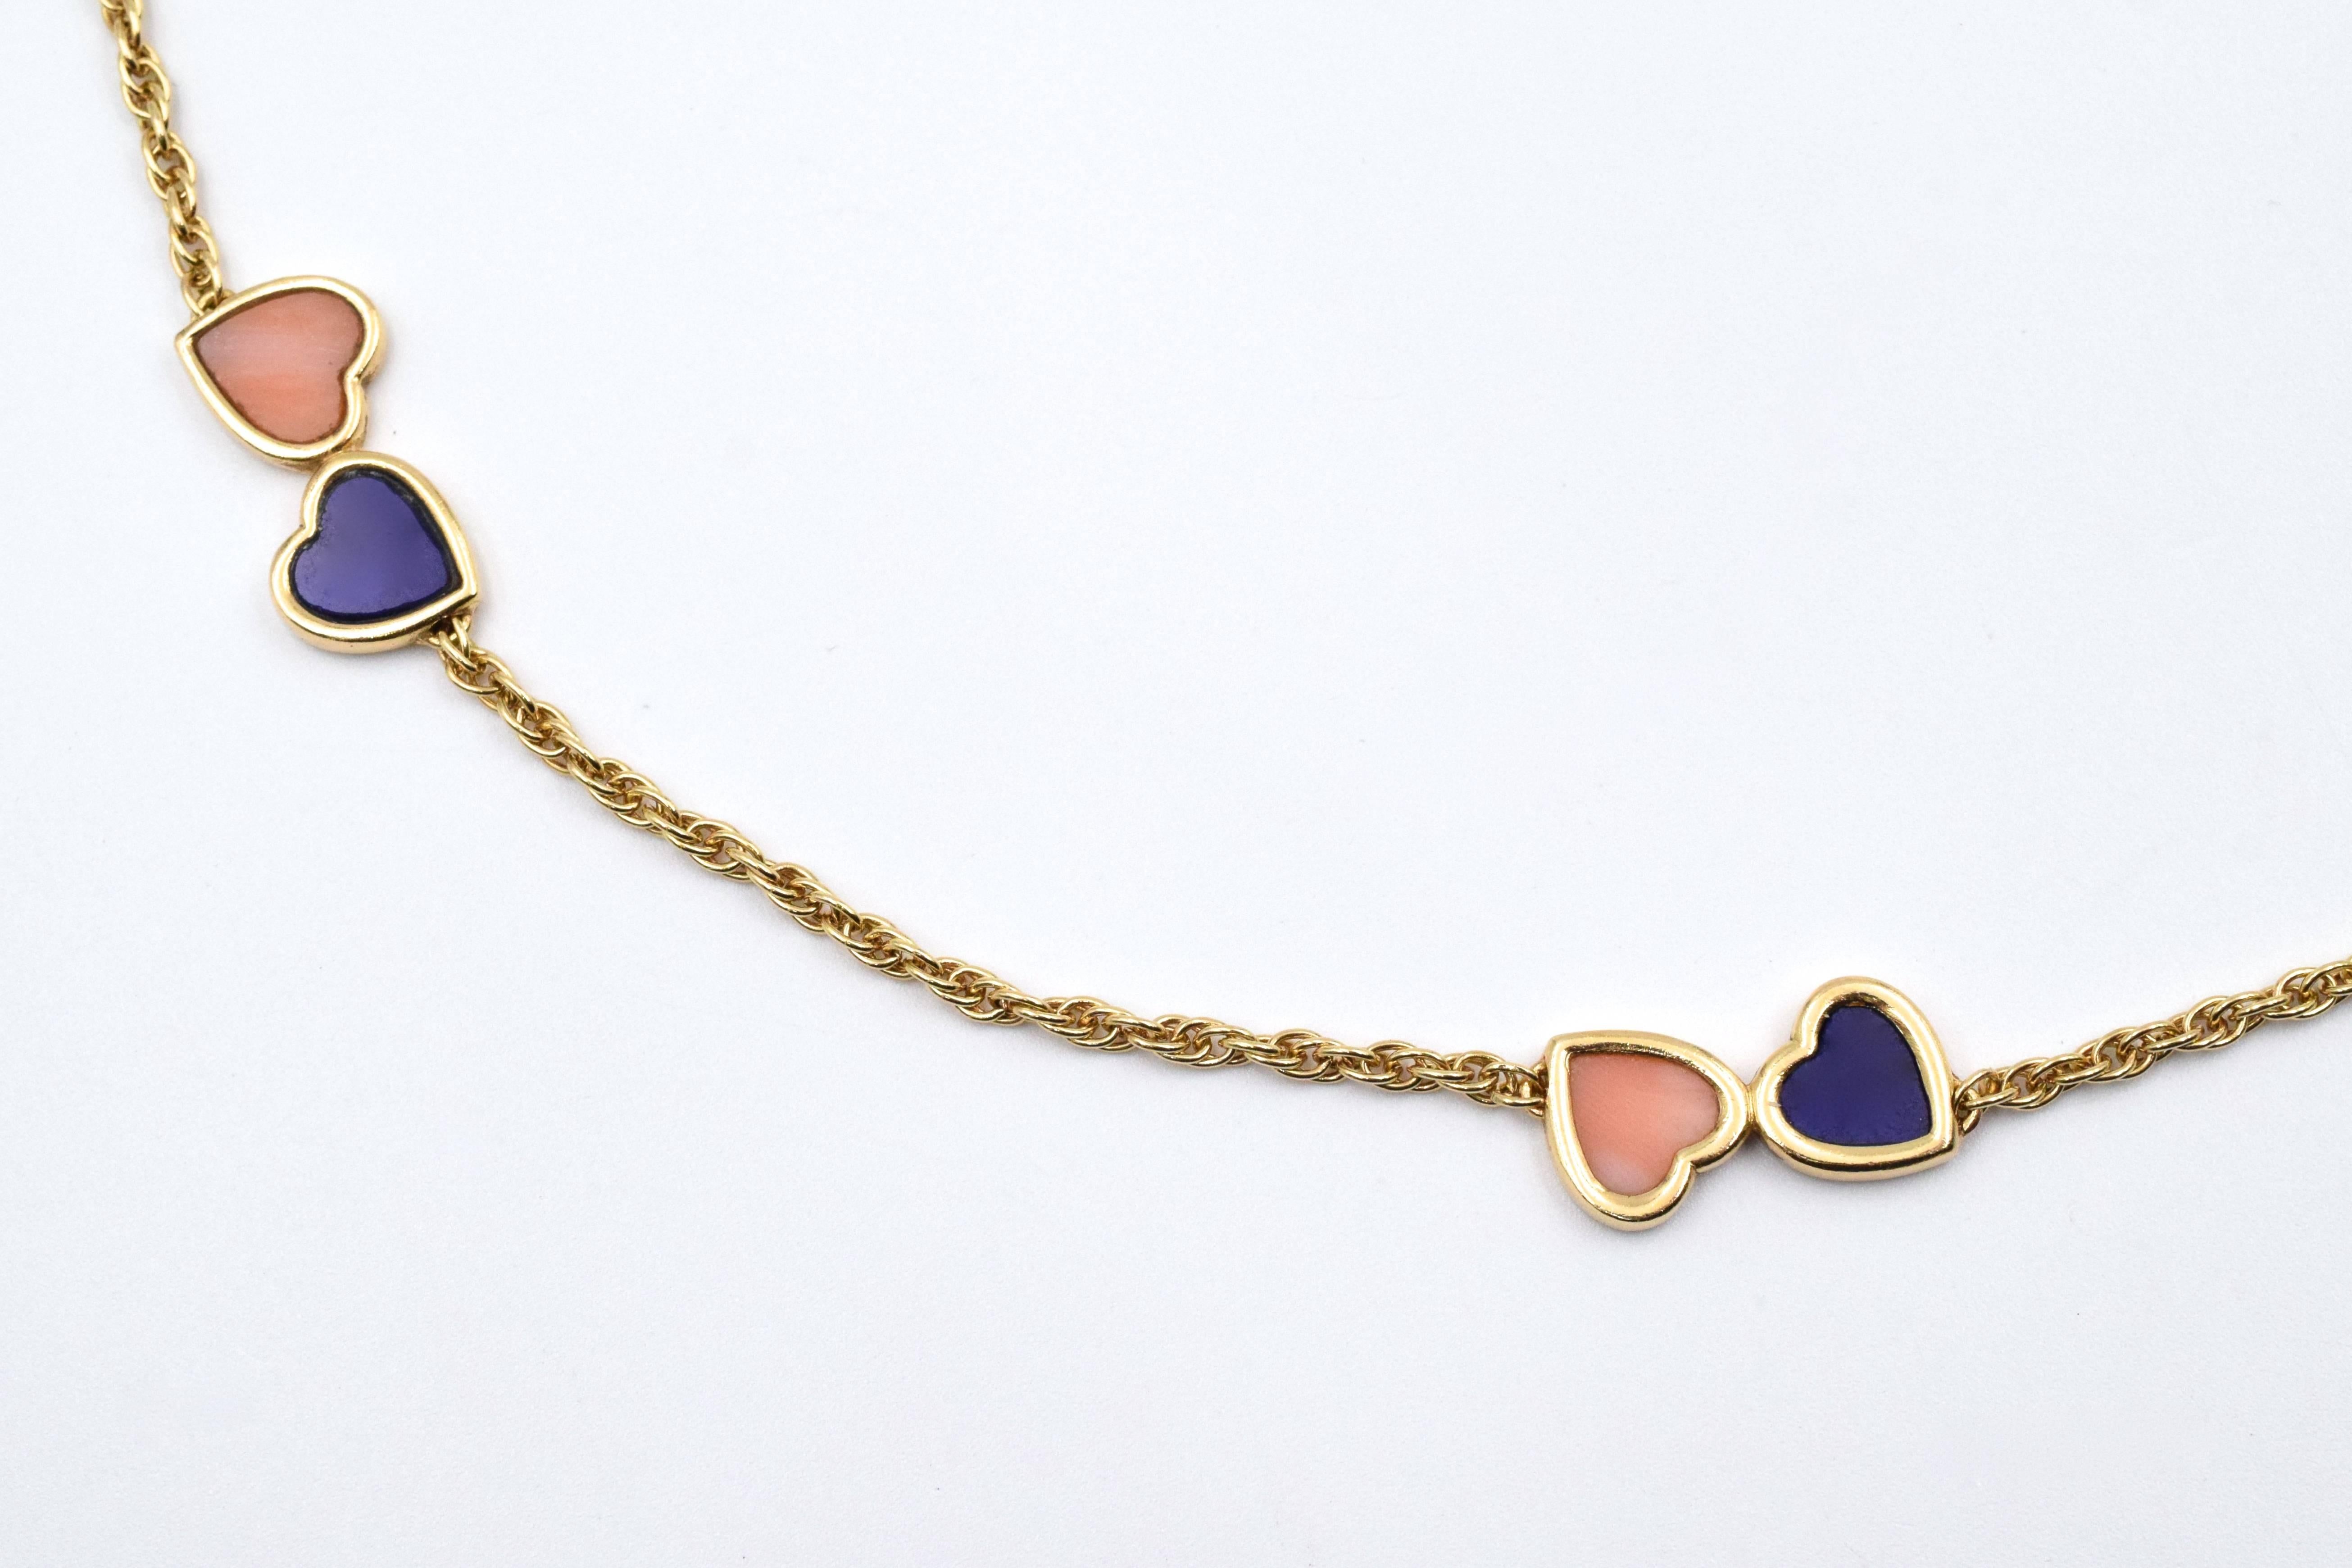 Van Cleef and Arpels Double Heart Lapis Lazuli and Pink Coral Long Chain. This necklace has 10 pairs of hearts along the chain made up of lapis lazuli and pink coral all set in 18k yellow gold.
 Signed Van Cleef and Arpels, # CXXXXXX, and 18k. The